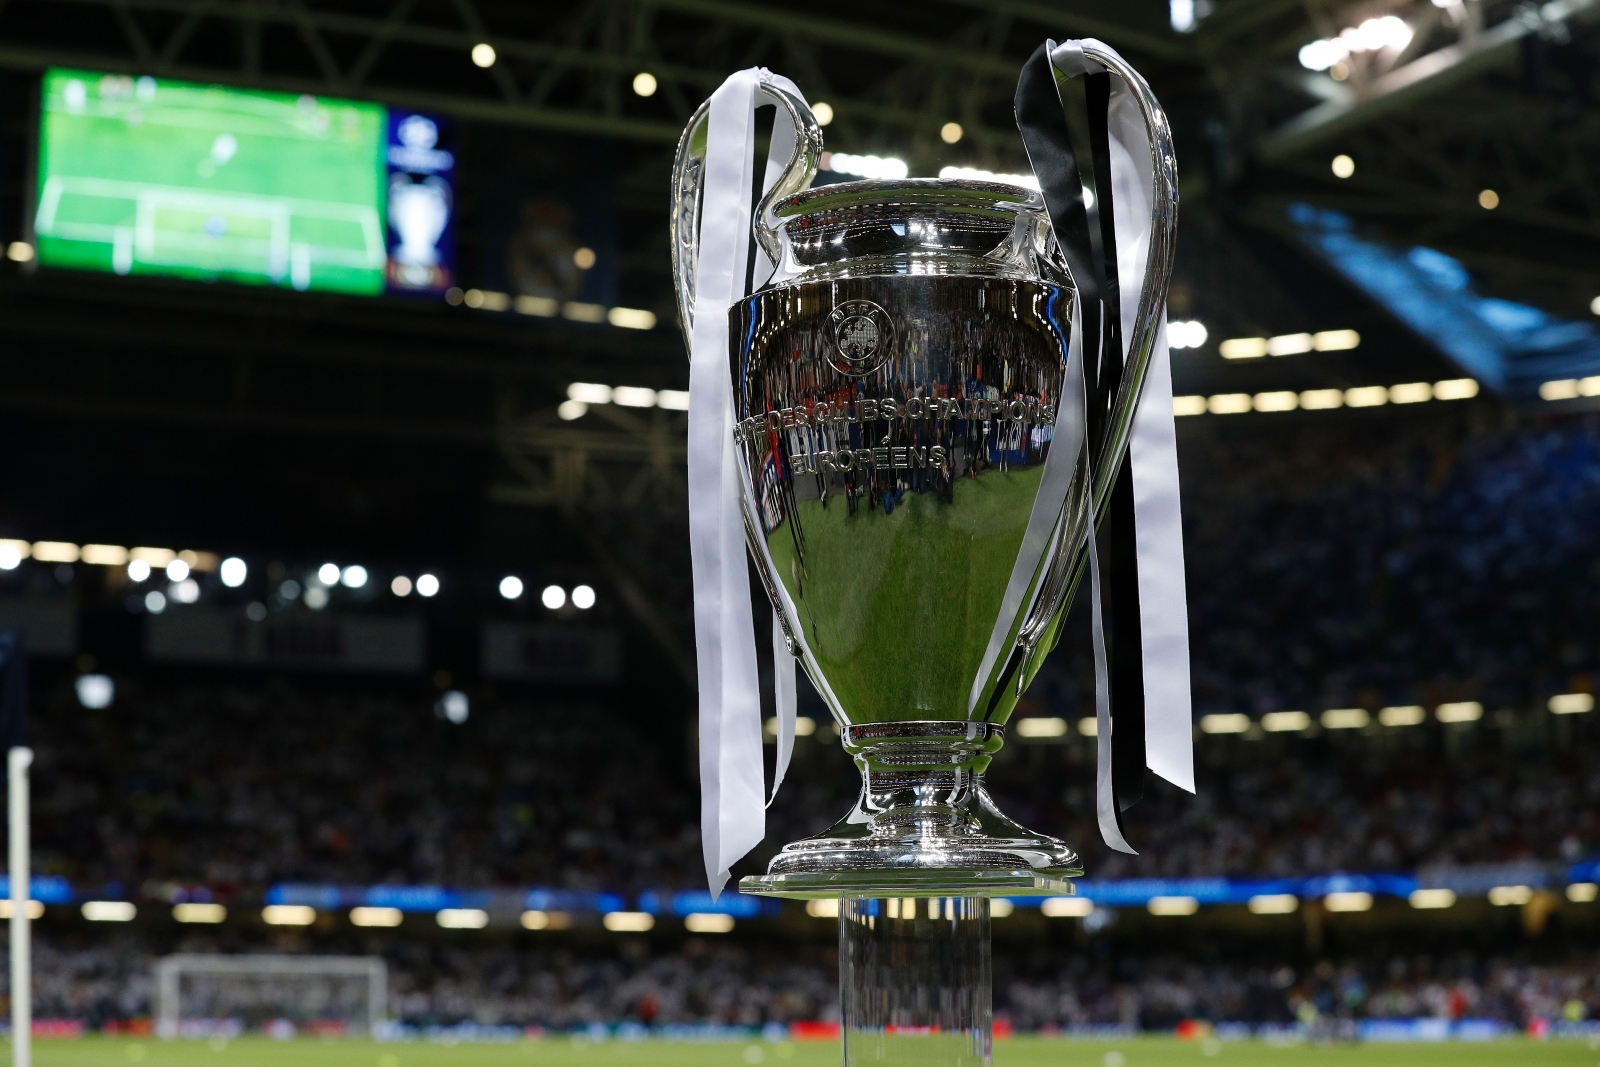 Uefa Champions League 2017-18 group stage draw - LIVE